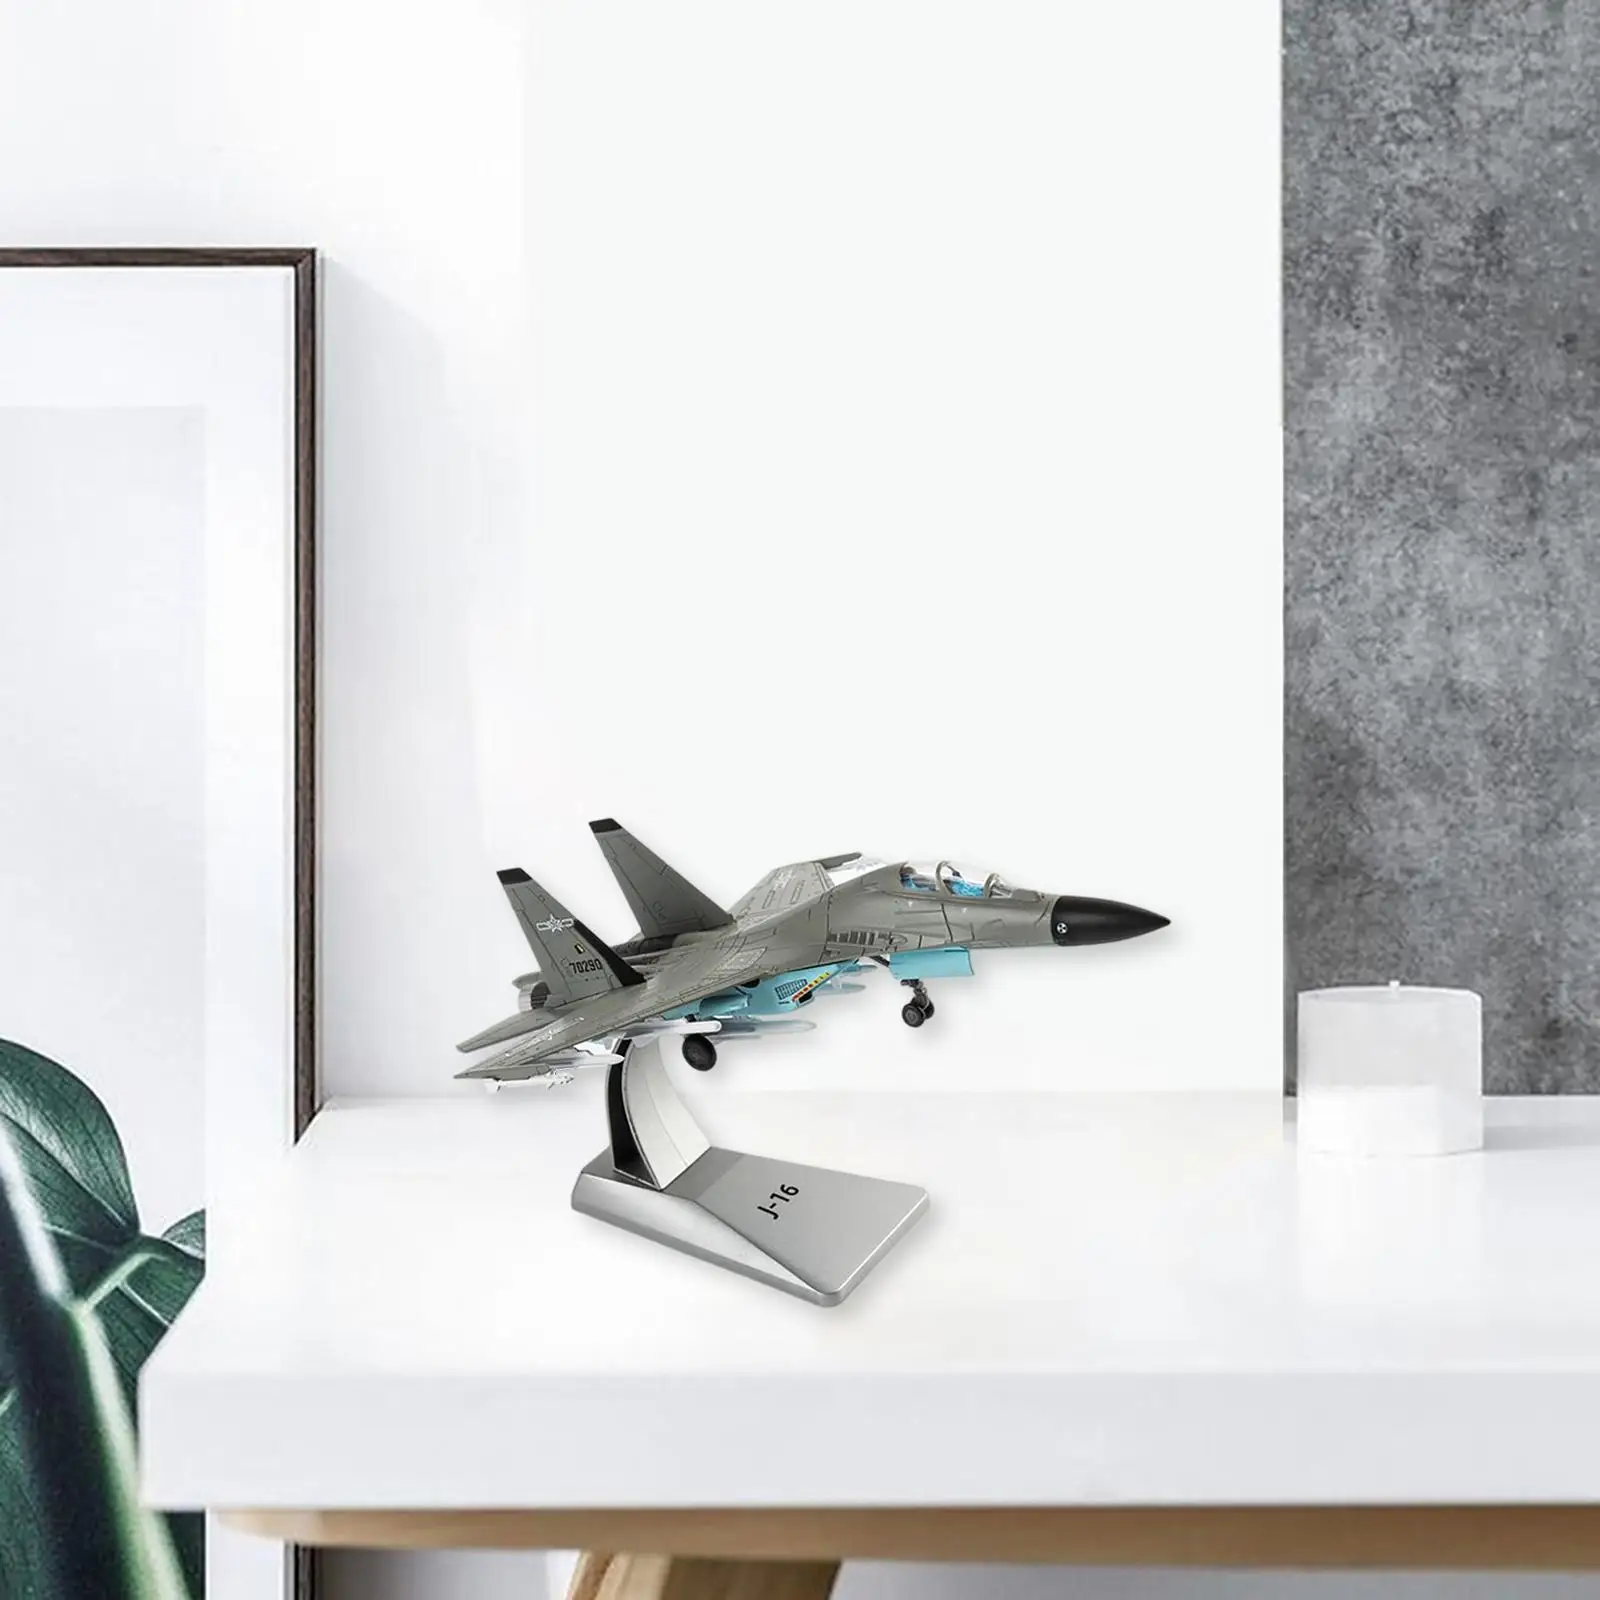 Simulation 1/100 J-16 Metal Fighter Model with Display Stand Airplane Aviation Collectibles Desk Decor Static Display Souvenir